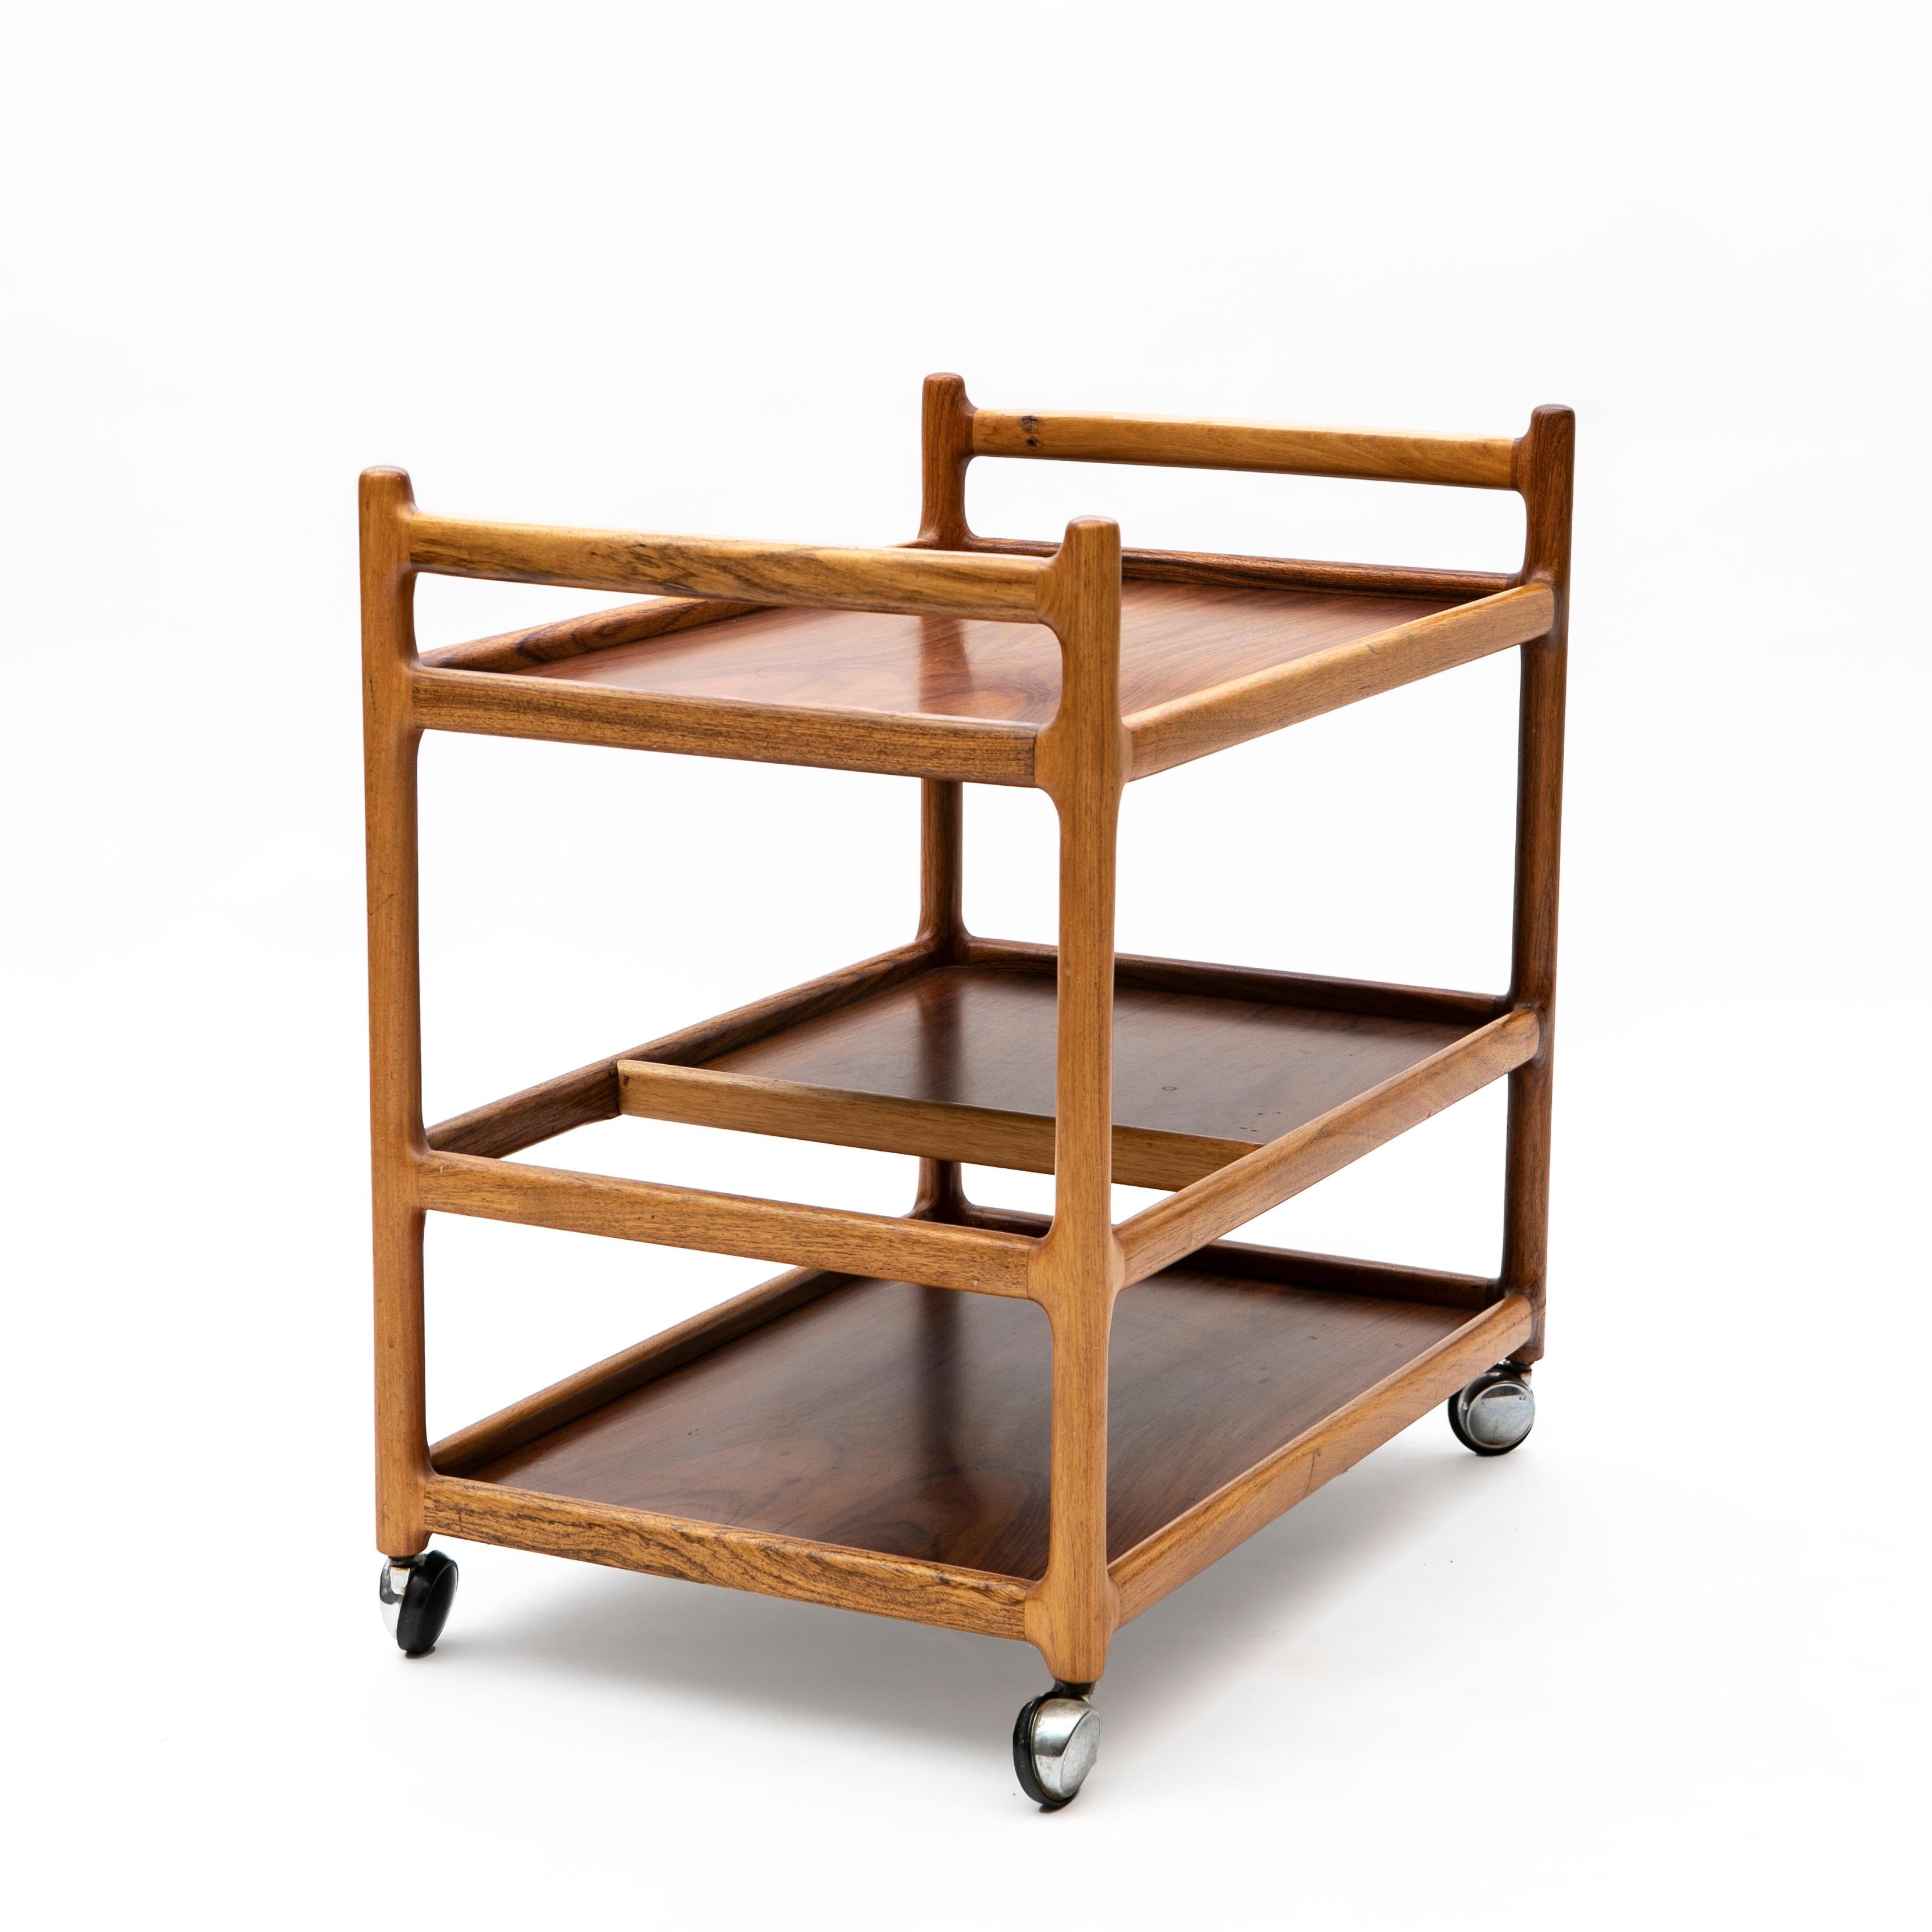 Serving trolley / bar cart with shelves designed by Johannes Andersen.
Constructed in rosewood set on chromed casters for easy movement.
Produced by CFC Silkeborg in Denmark, 1960's.

In very good original vintage condition with great